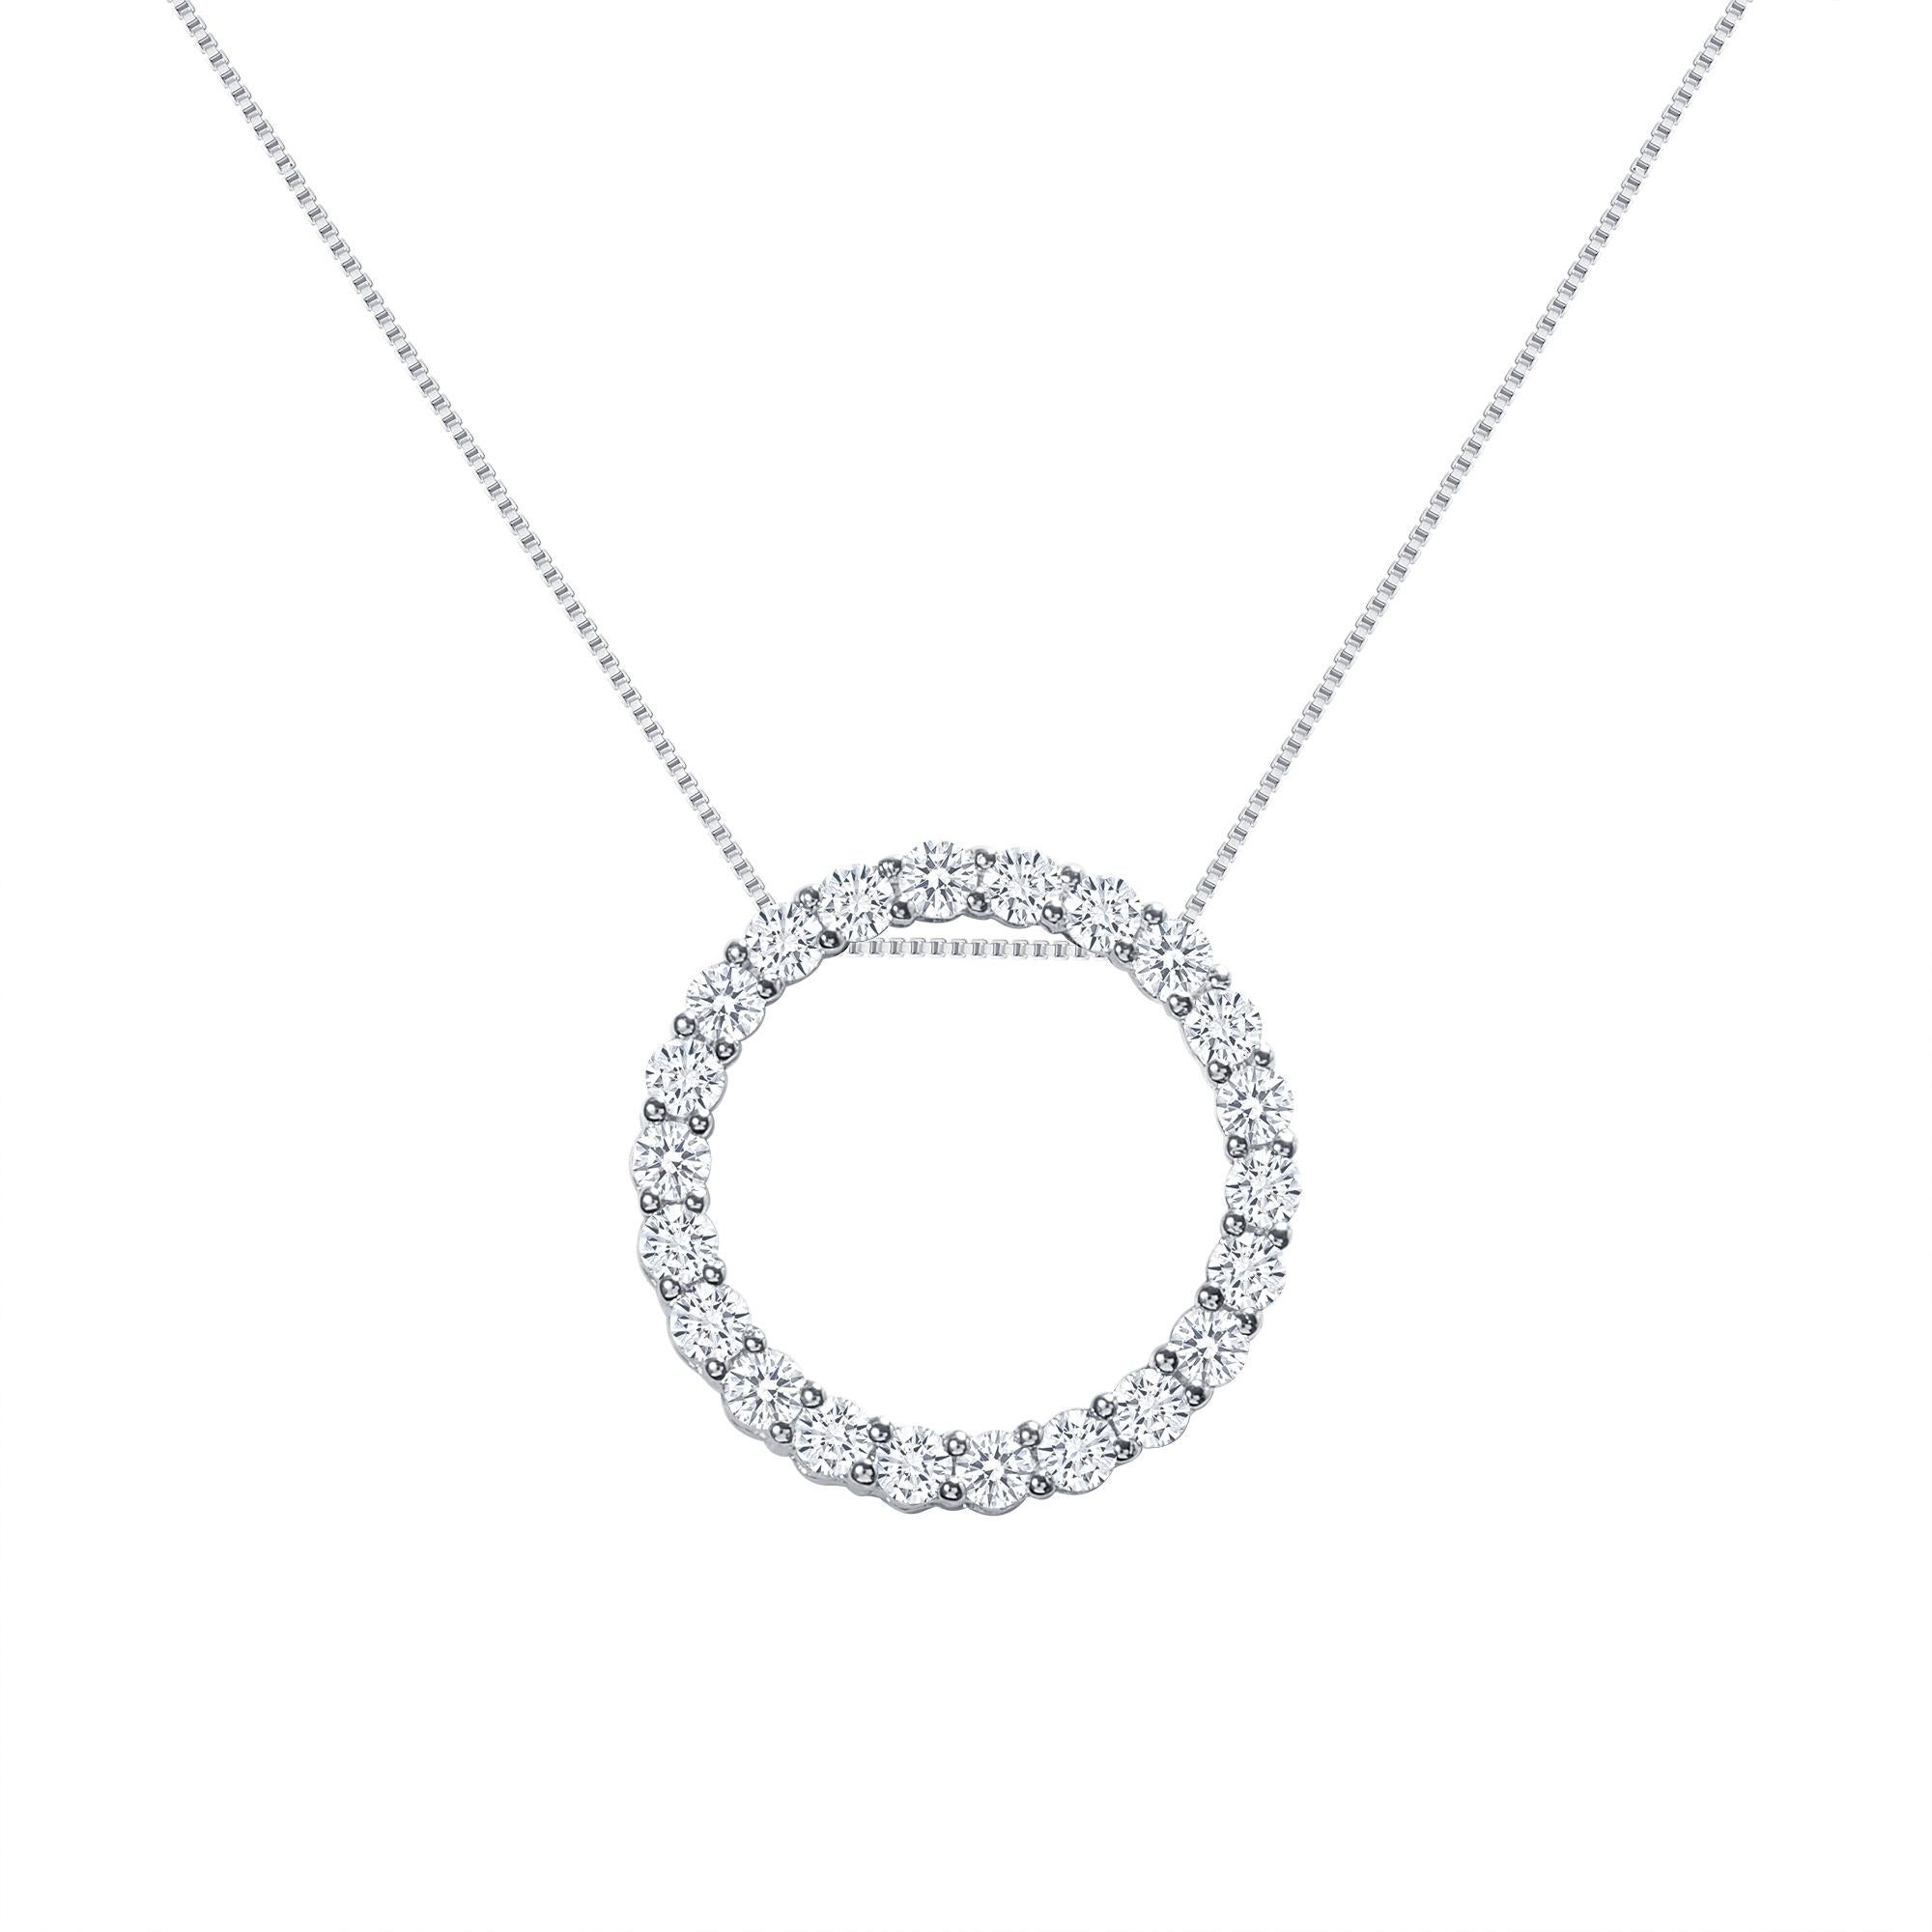 This diamond circle pendant provides a glowing chic look.
Metal: 14k Gold
Diamond Total Carats: 1 carat
Diamond Cut: Round Natural Diamonds (Not Lab Grown)
Diamond Clarity: VS
Diamond Color: F-G
Color: White Gold
Necklace Length: 18 inches